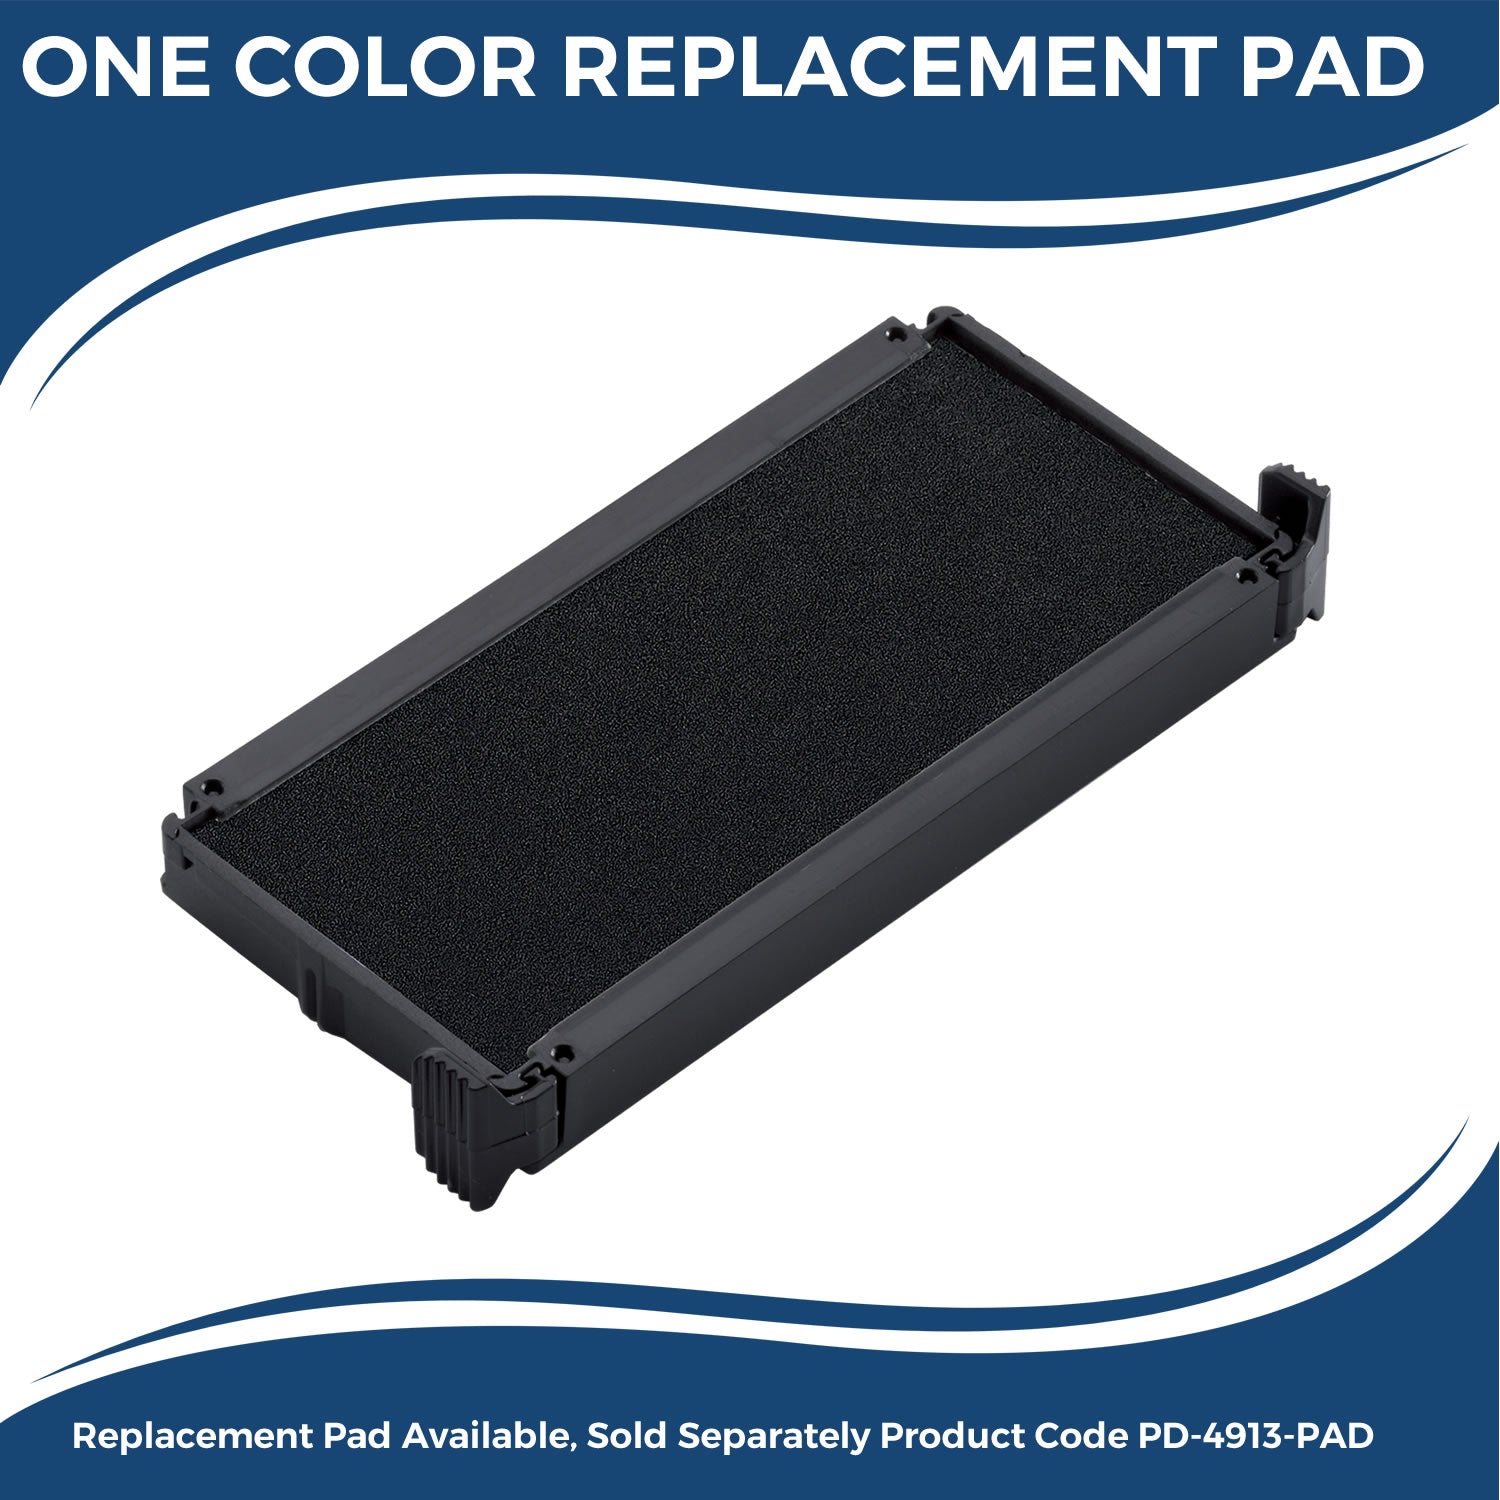 Large Self-Inking Duplicado Stamp 5528S Large Replacment Pad